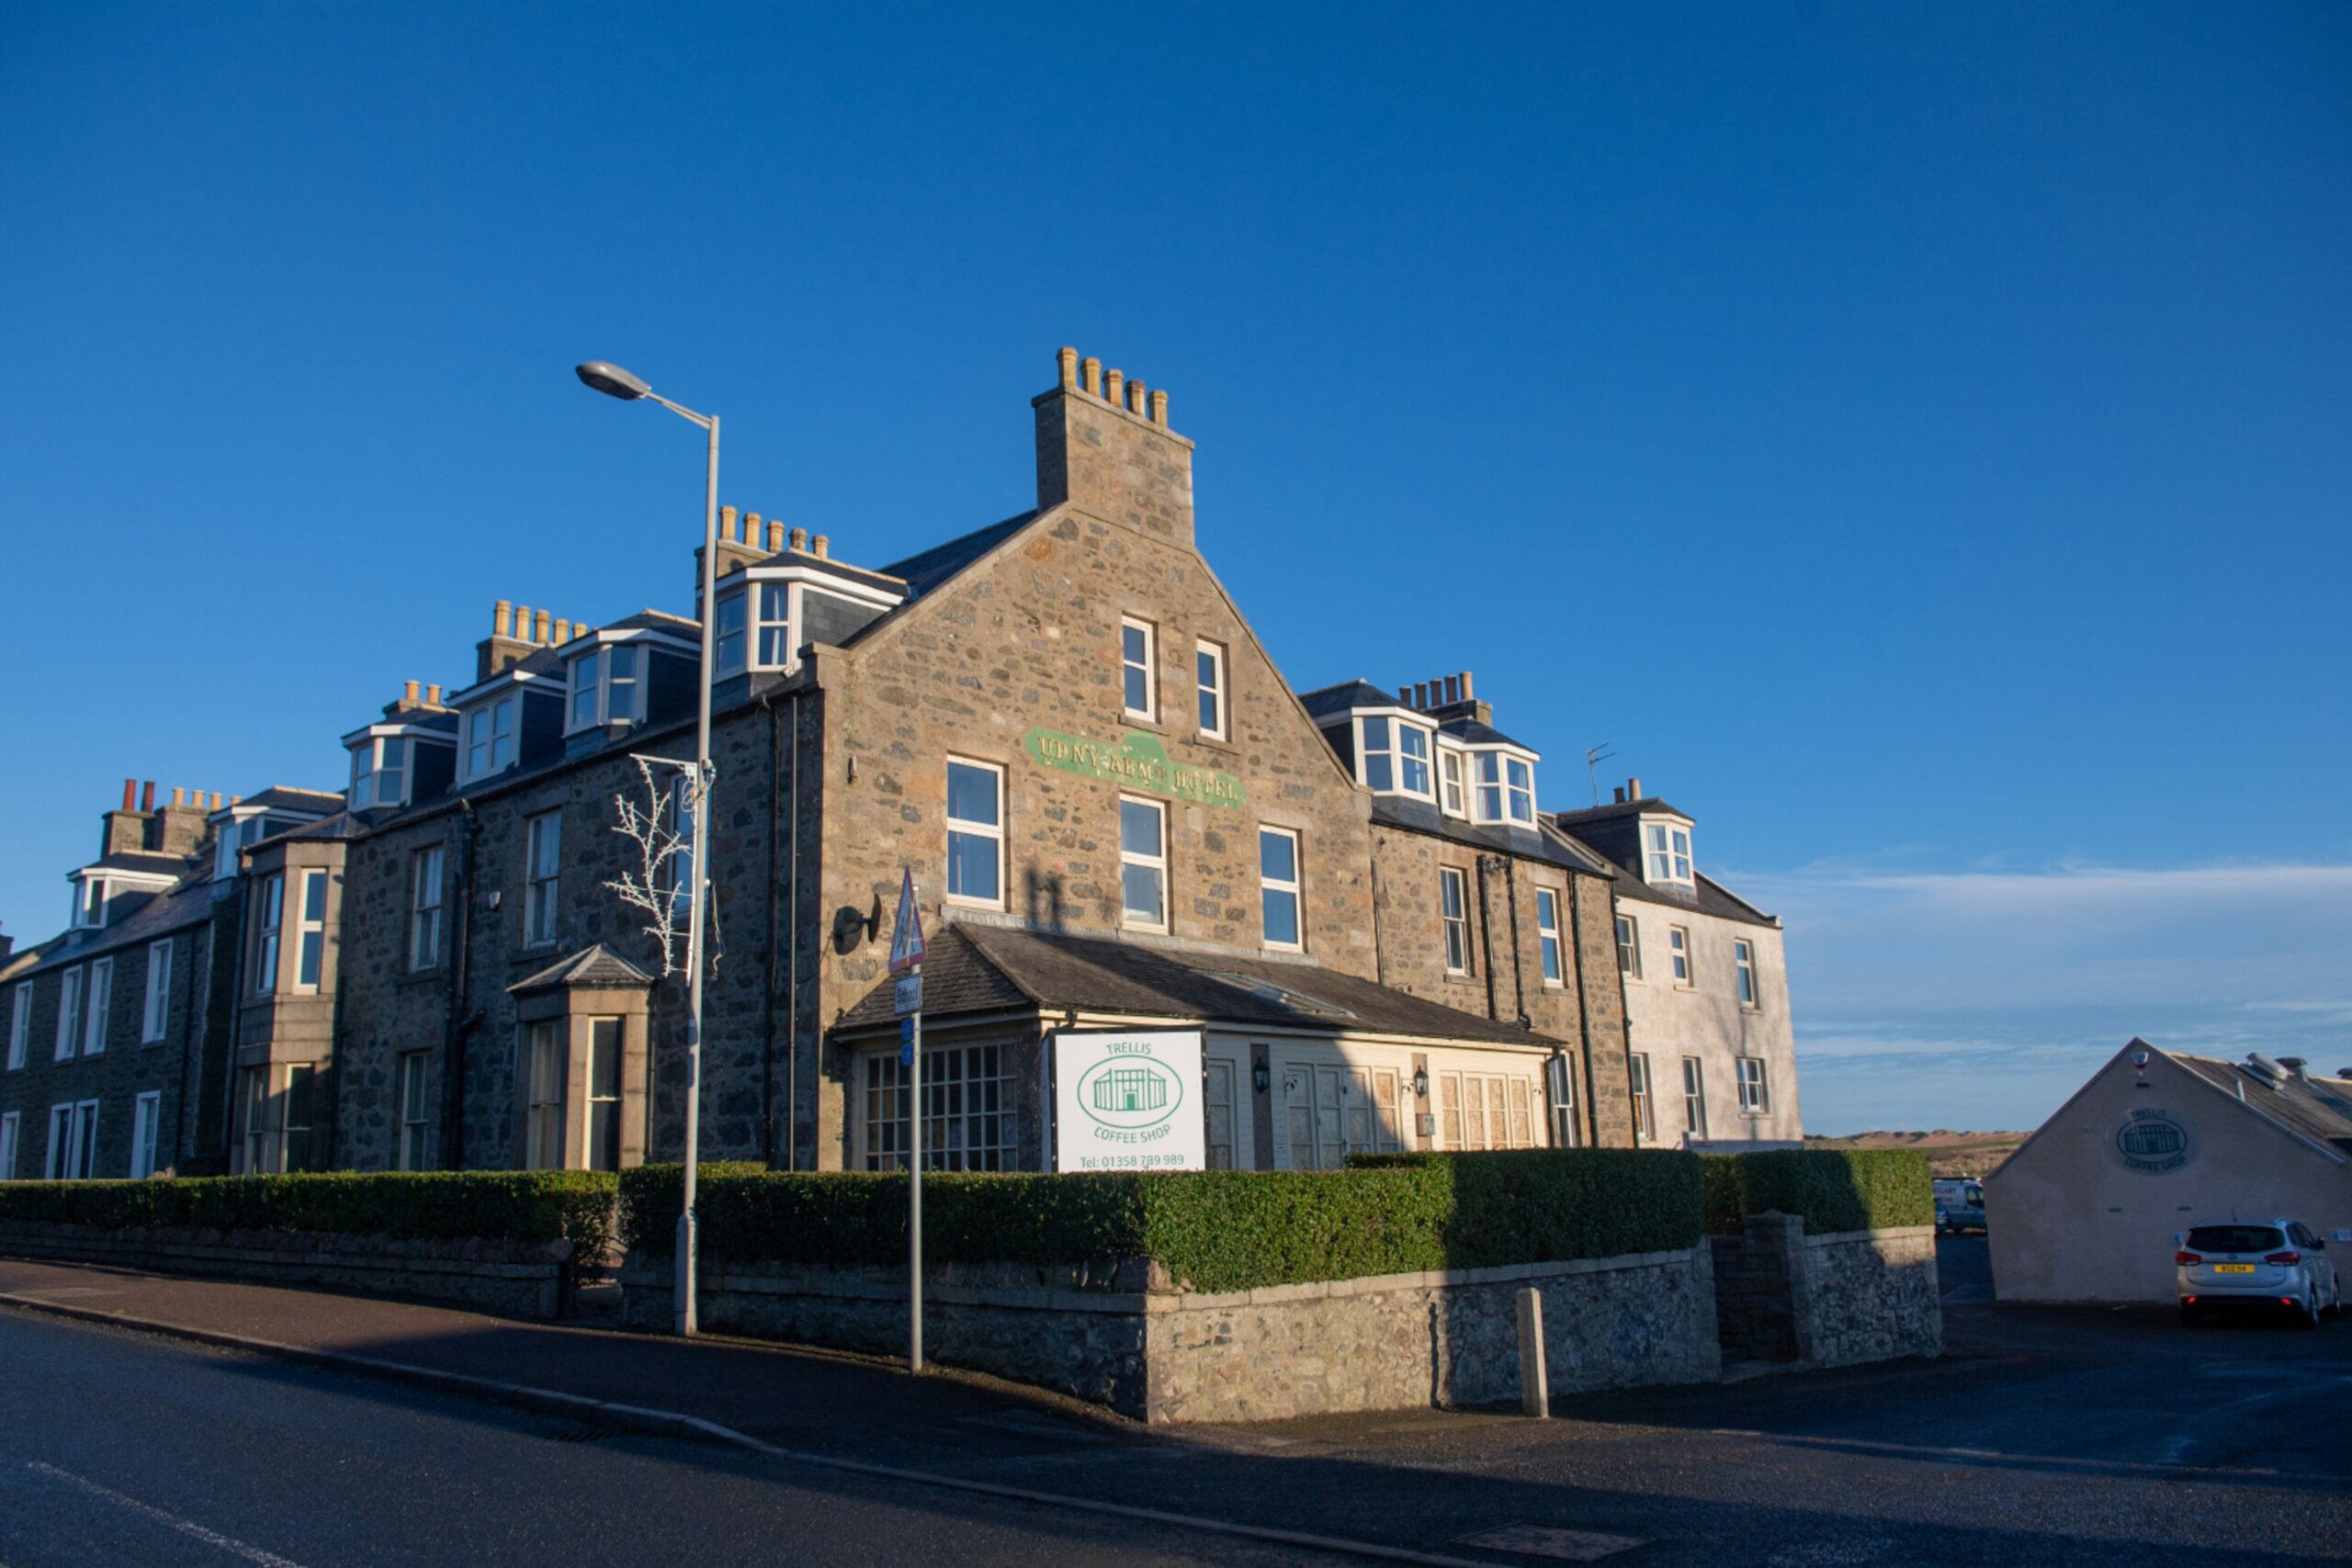 The Udny Arms Hotel in Newburgh, Aberdeenshire